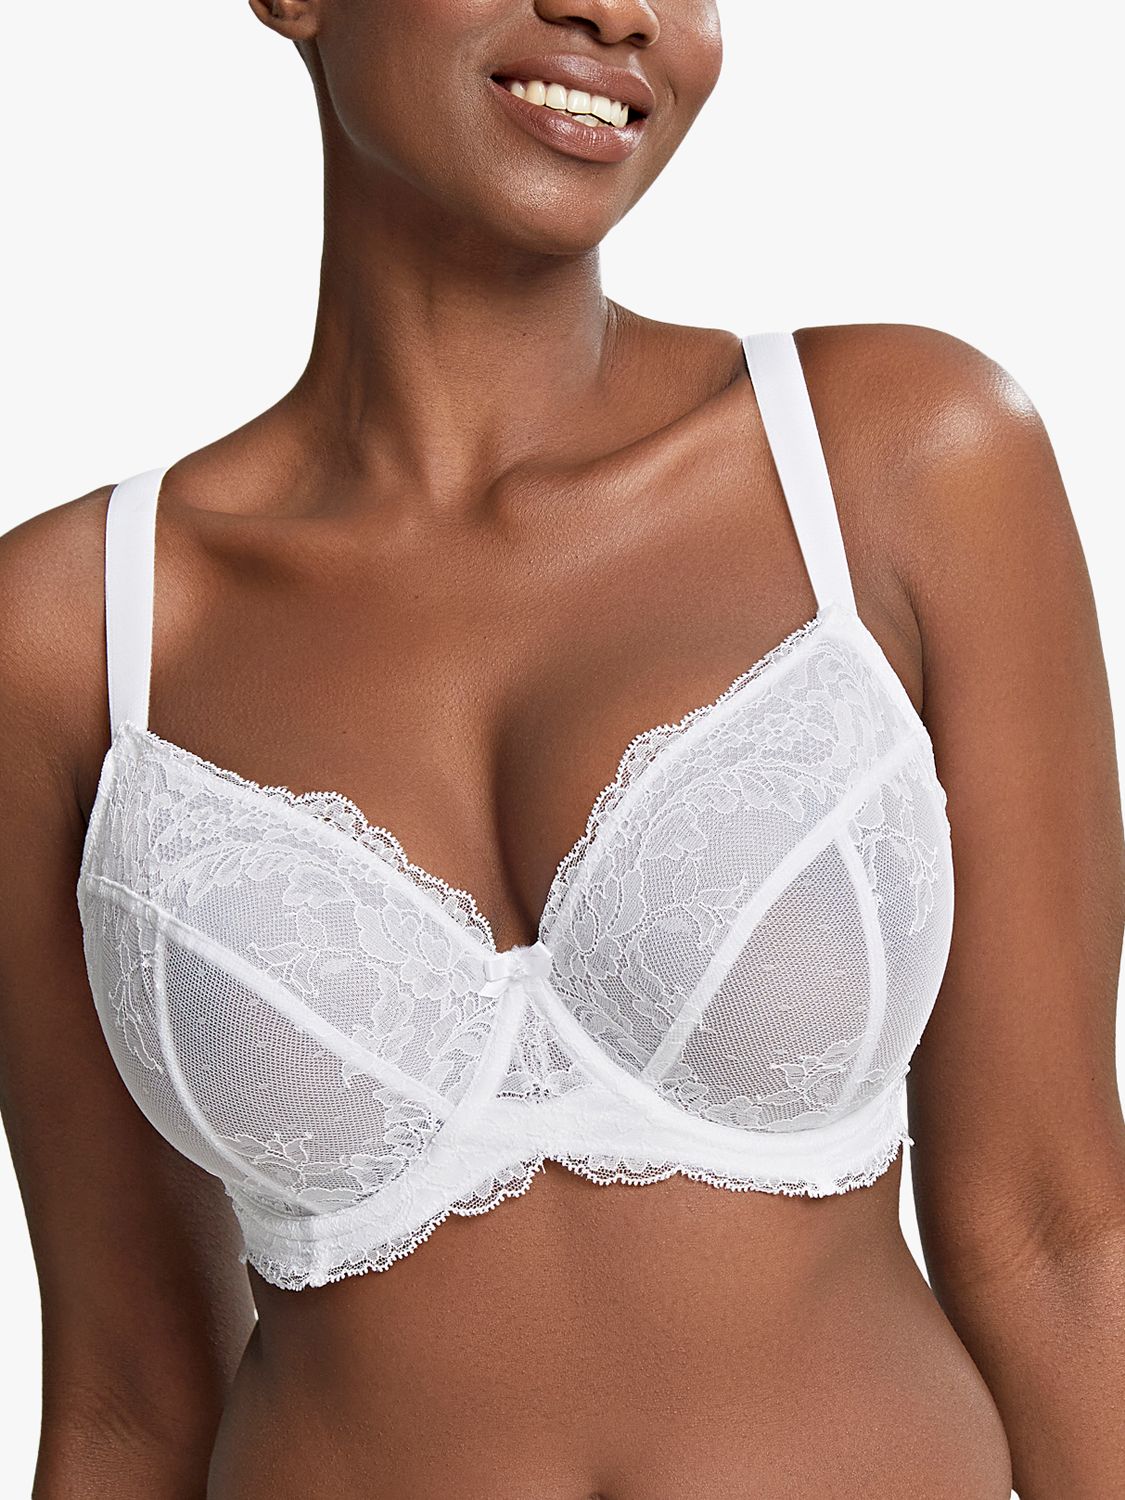 New Underwired padded white lace balconette bra 30GG/30J 